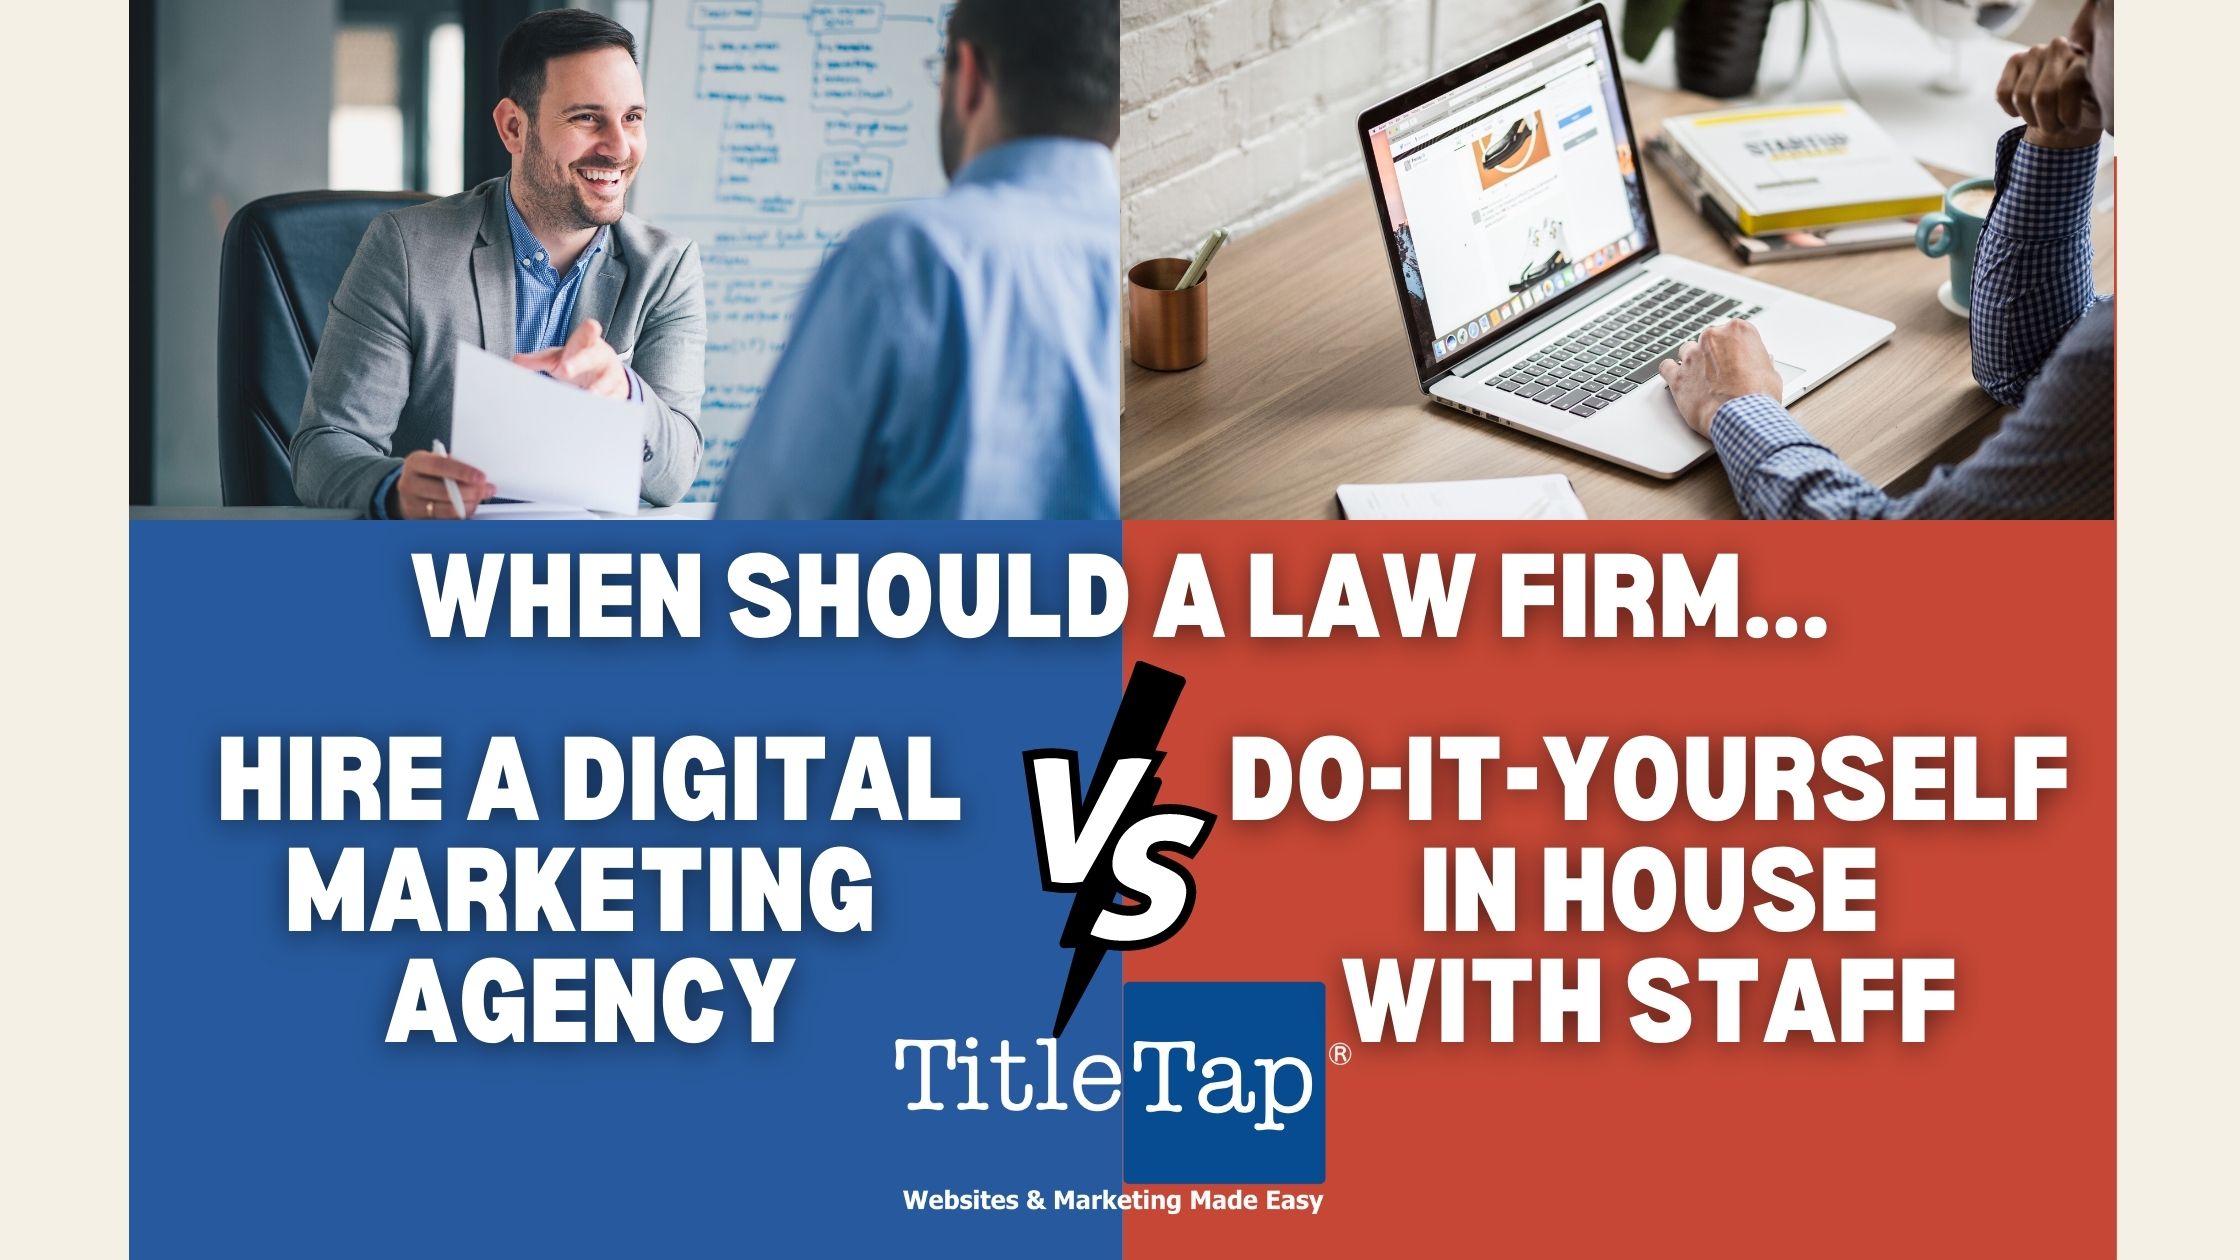 When to hire a law firm digital marketing agency for your website vs. DIY